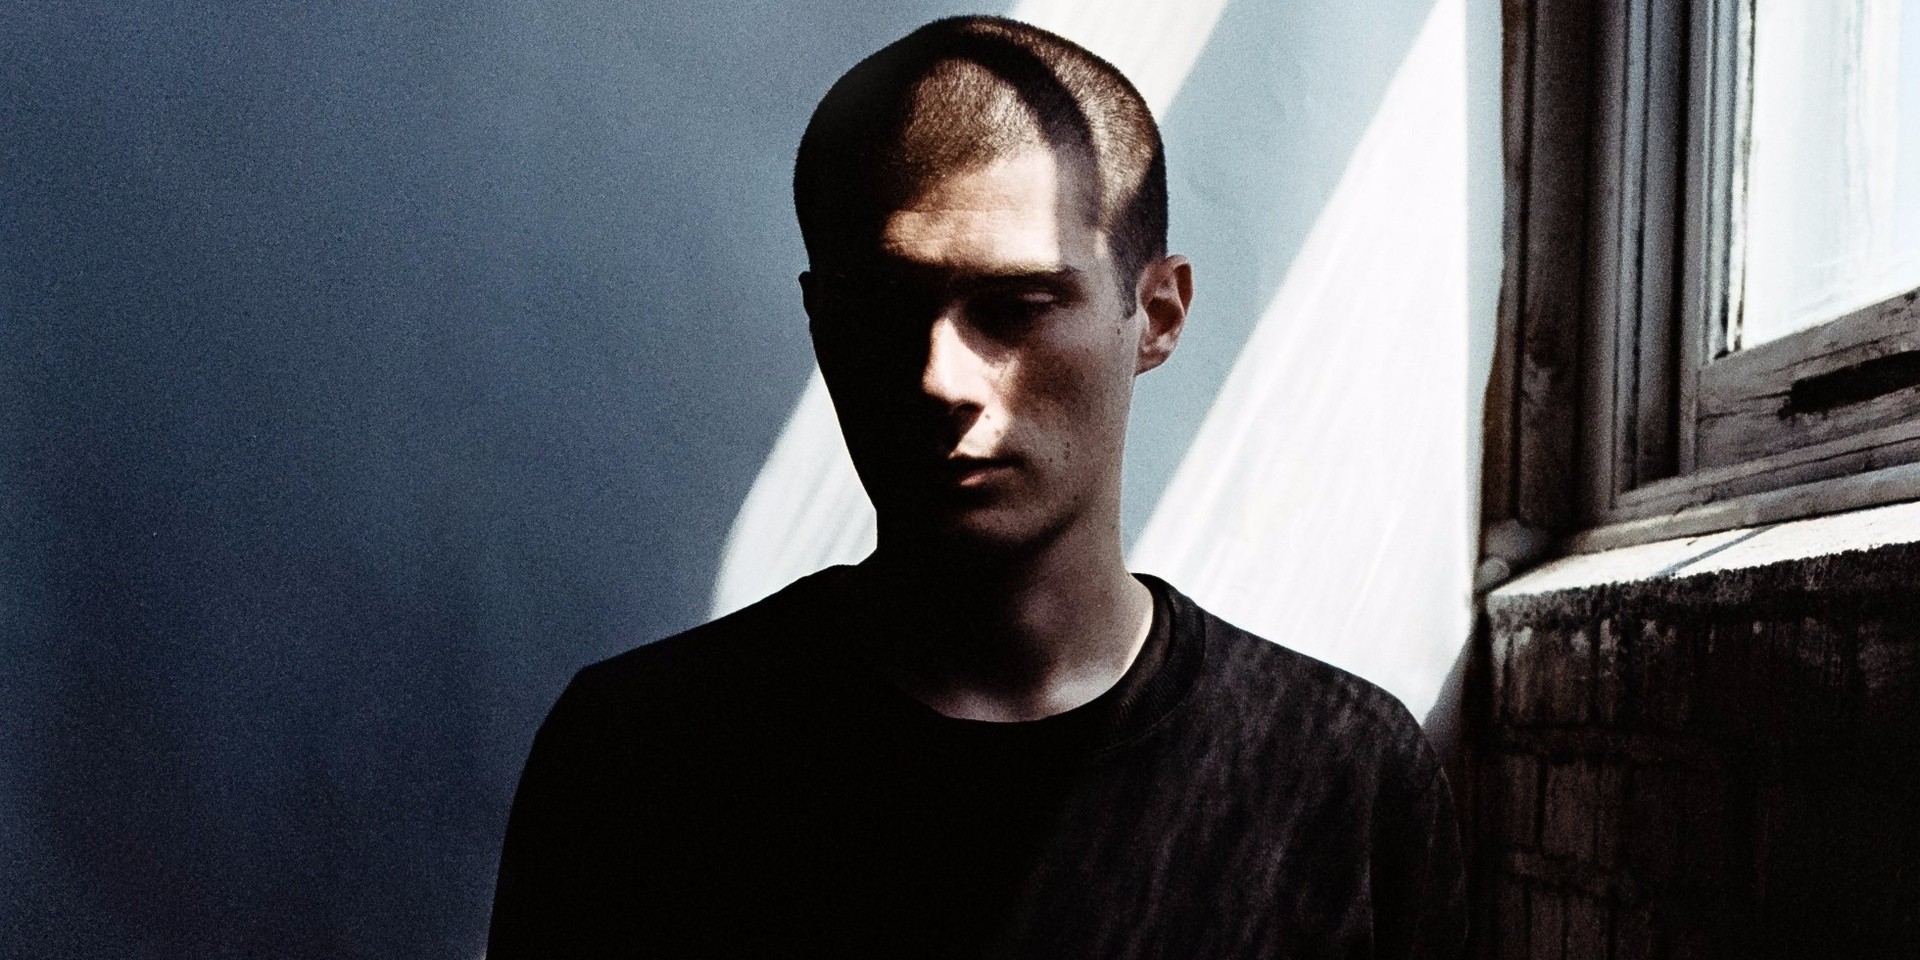 RAC returns to Singapore for a night of nu-disco and indie-dance revelry